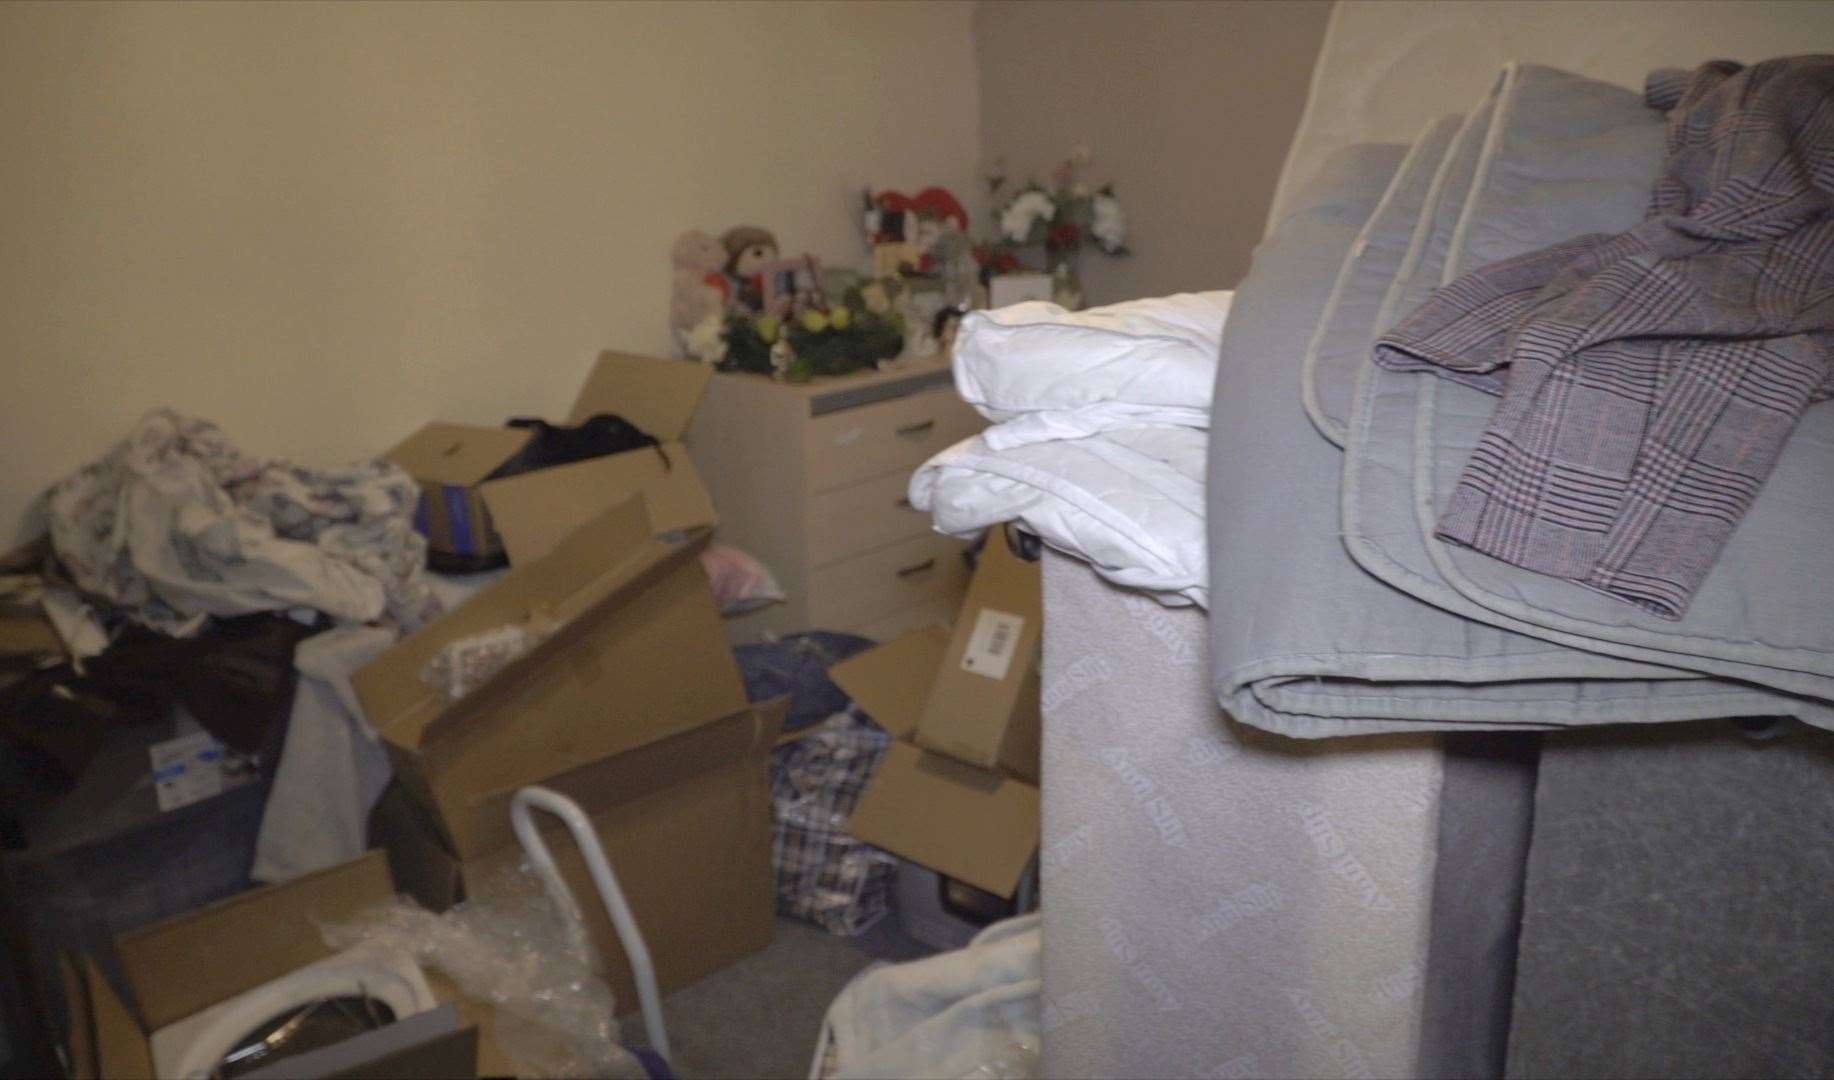 Ms Roberts says her bedroom has been packed up for nine months – with clothes and bedding going mouldy